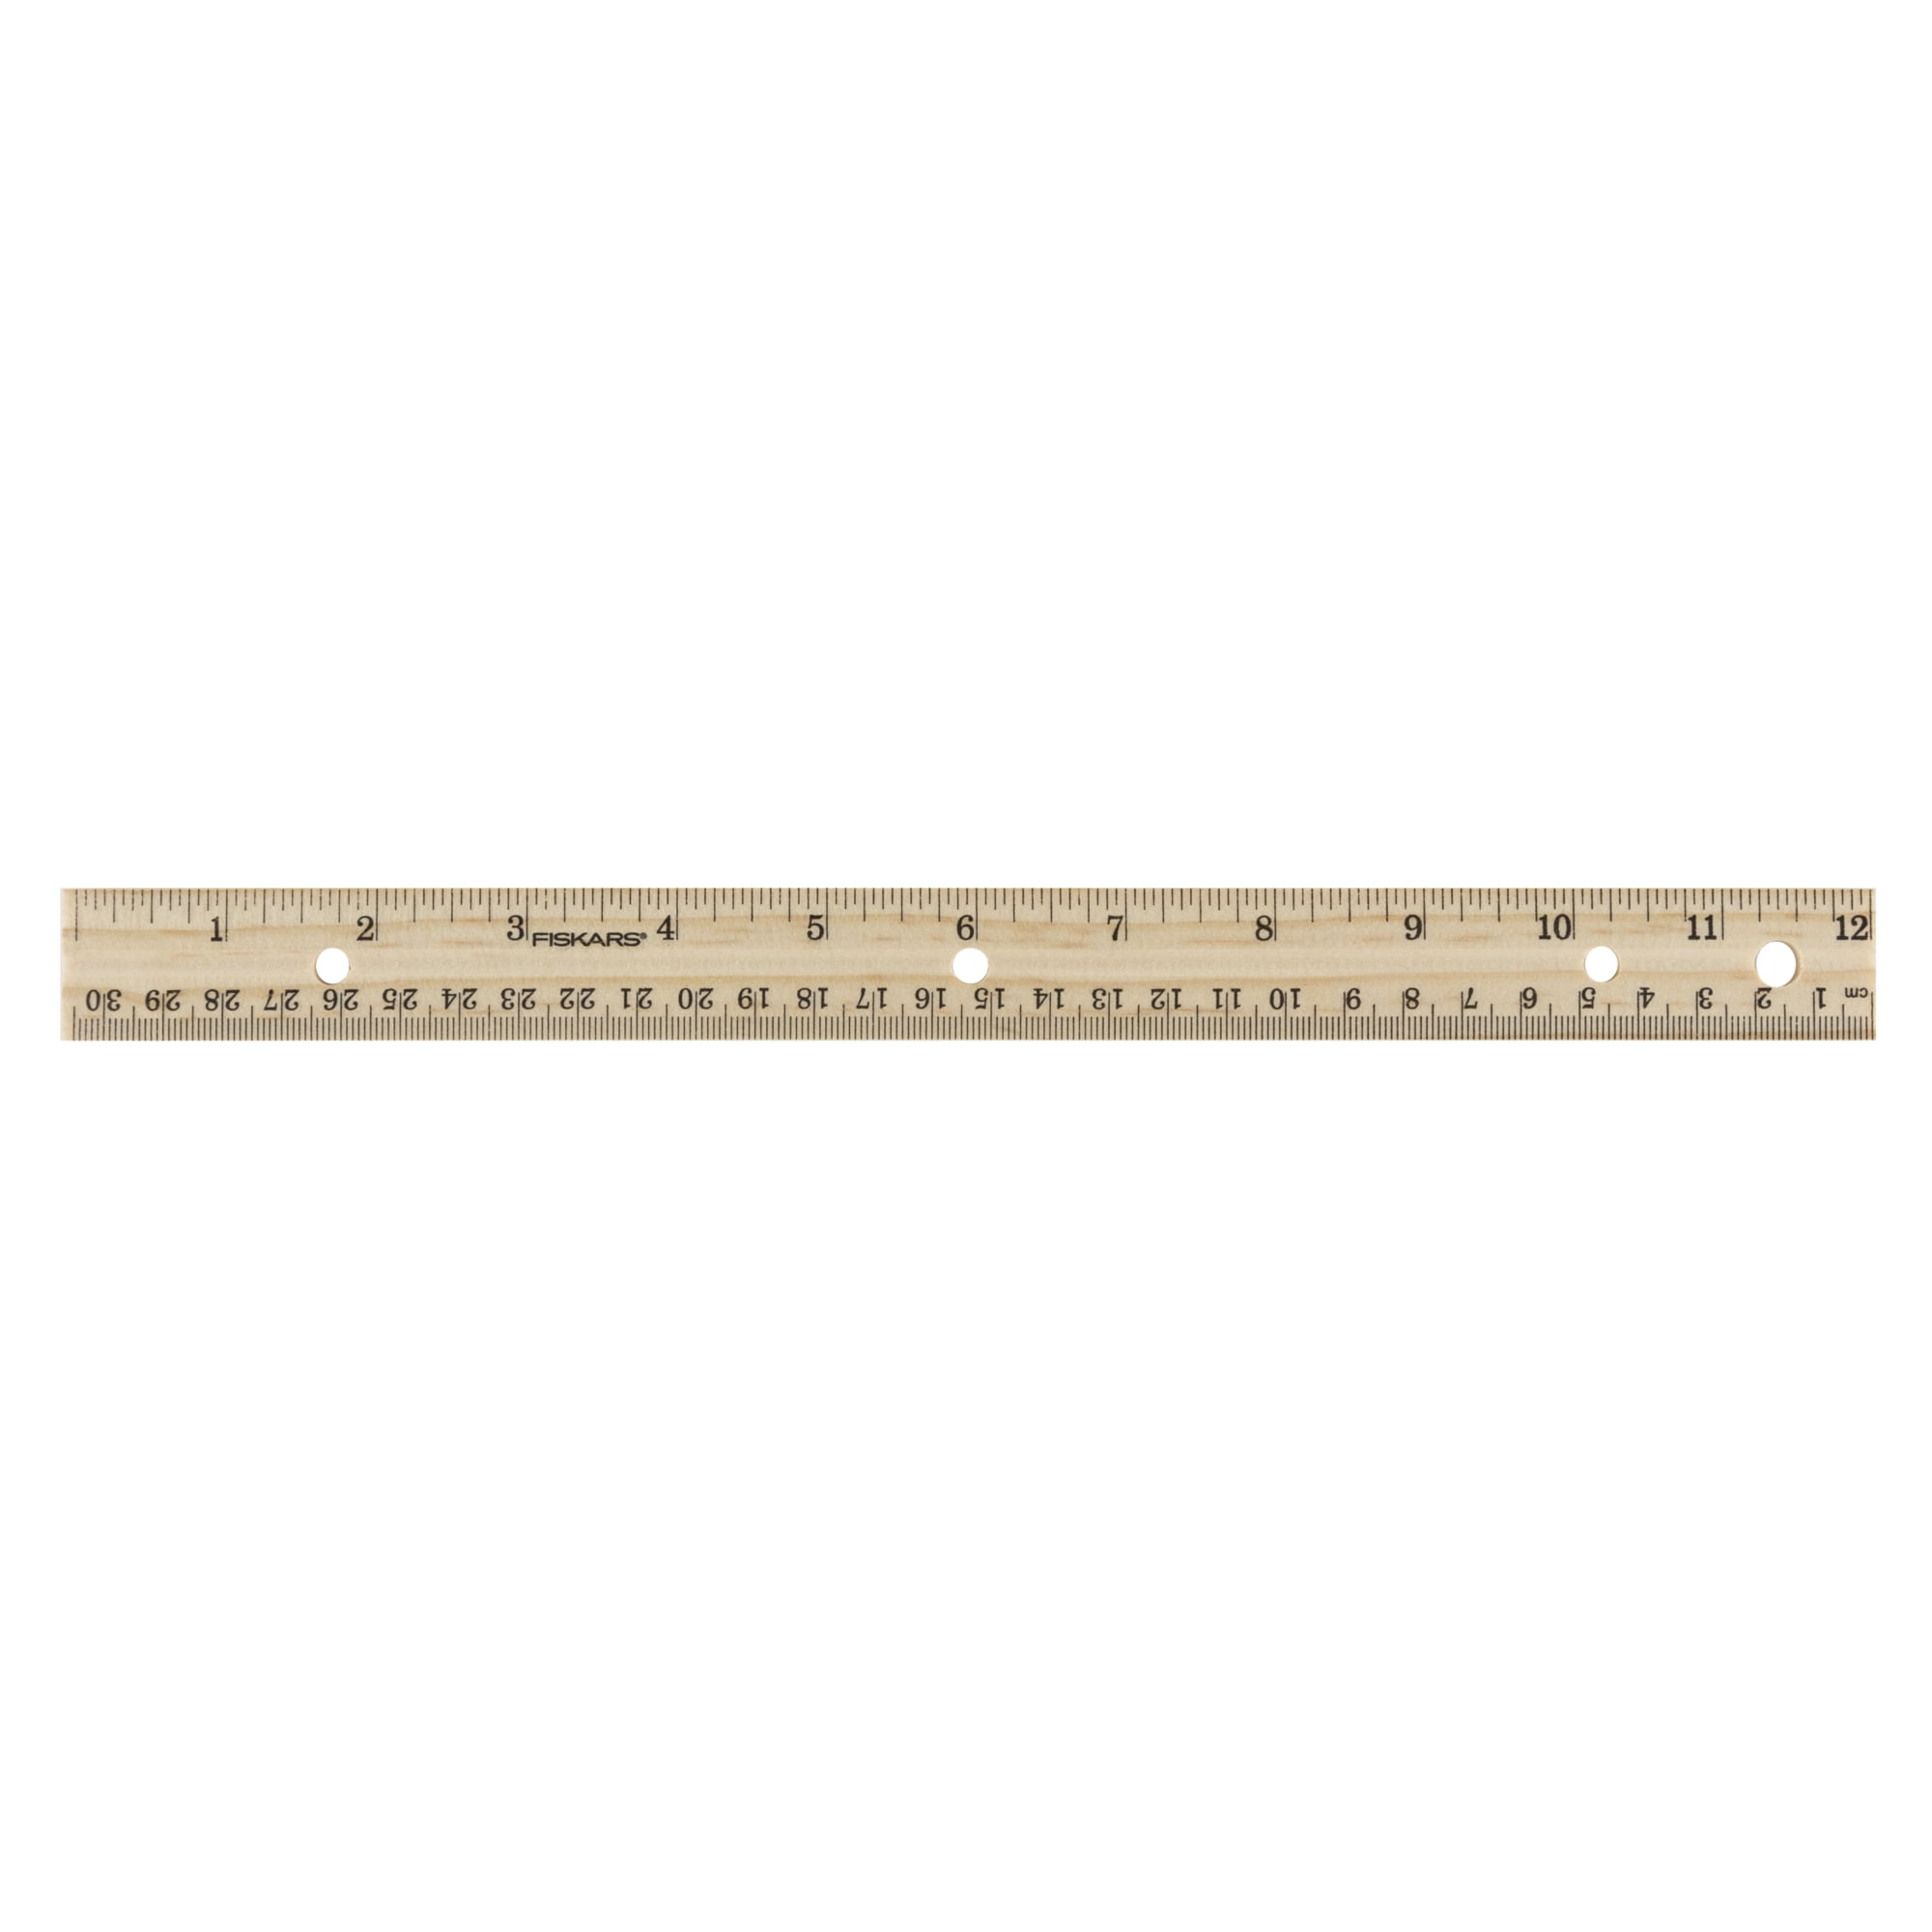 Fiskars 12 Wood Ruler Inches And Centimeters Walmart